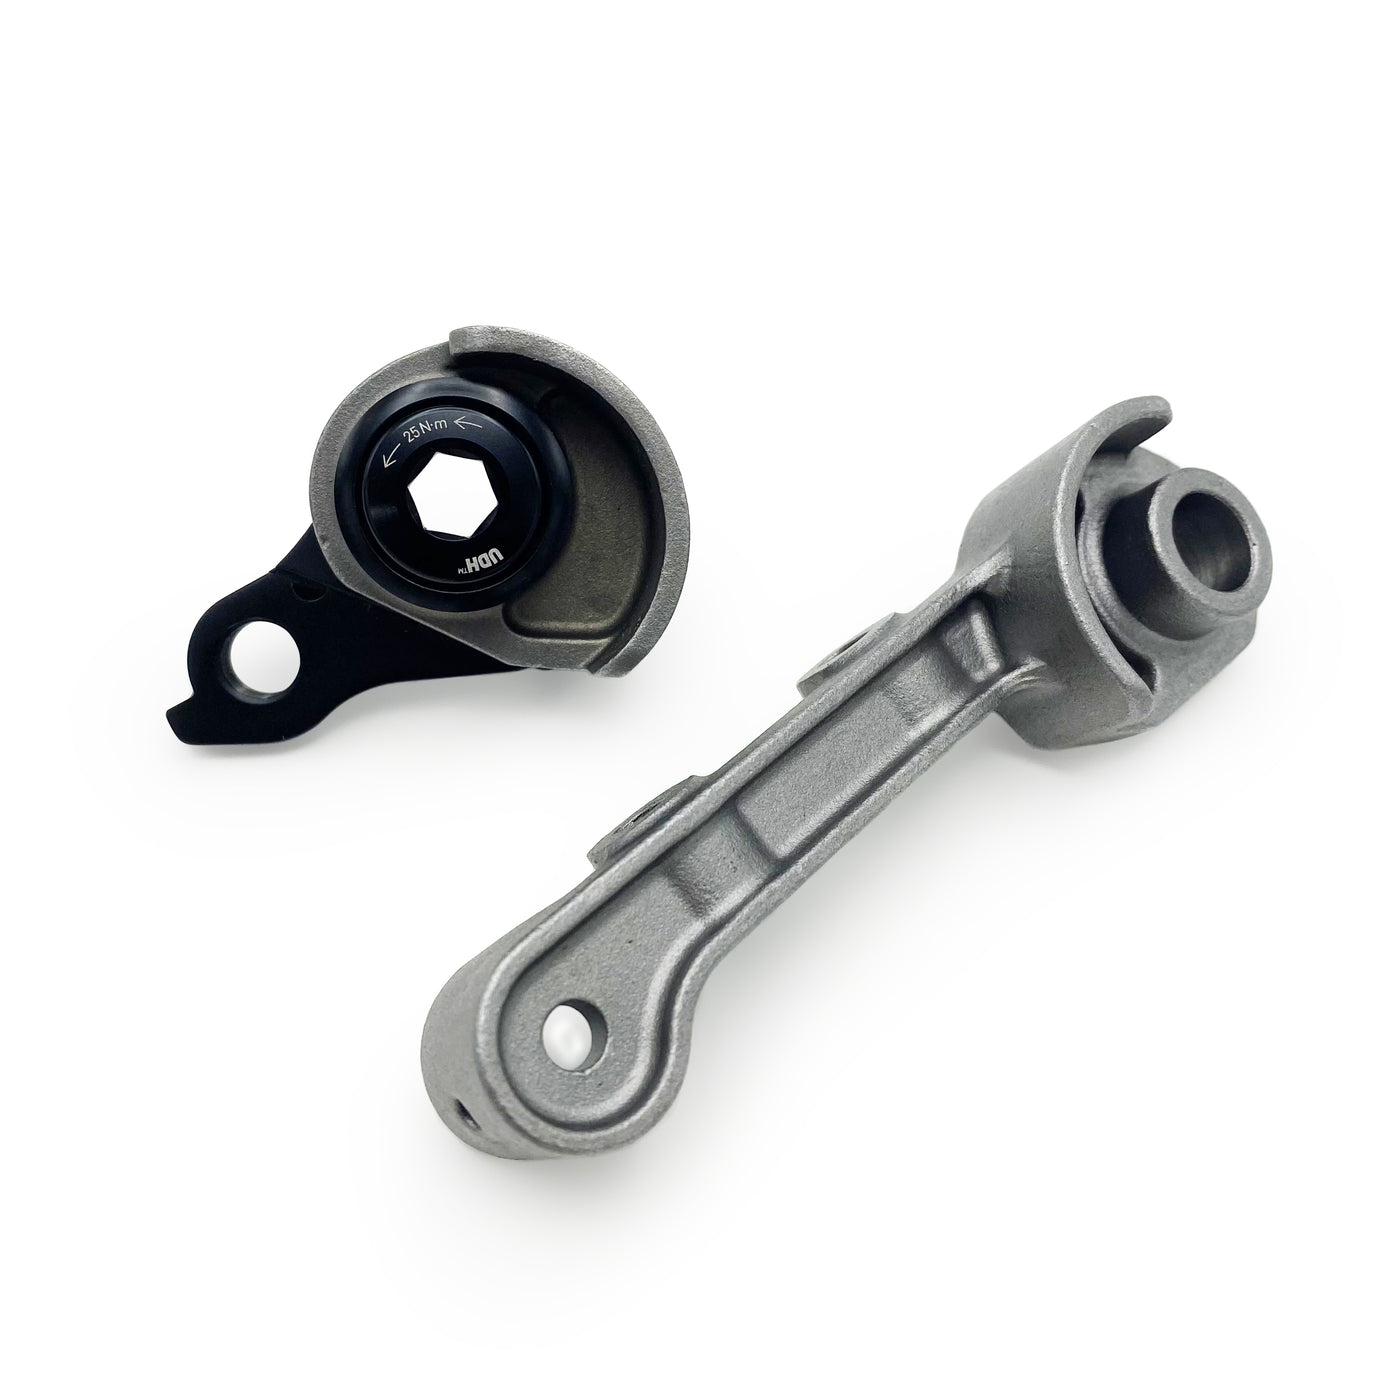 Hooded rear thru-axle dropout for flat-mount disc brakes for SRAM Universal Derailleur Hanger